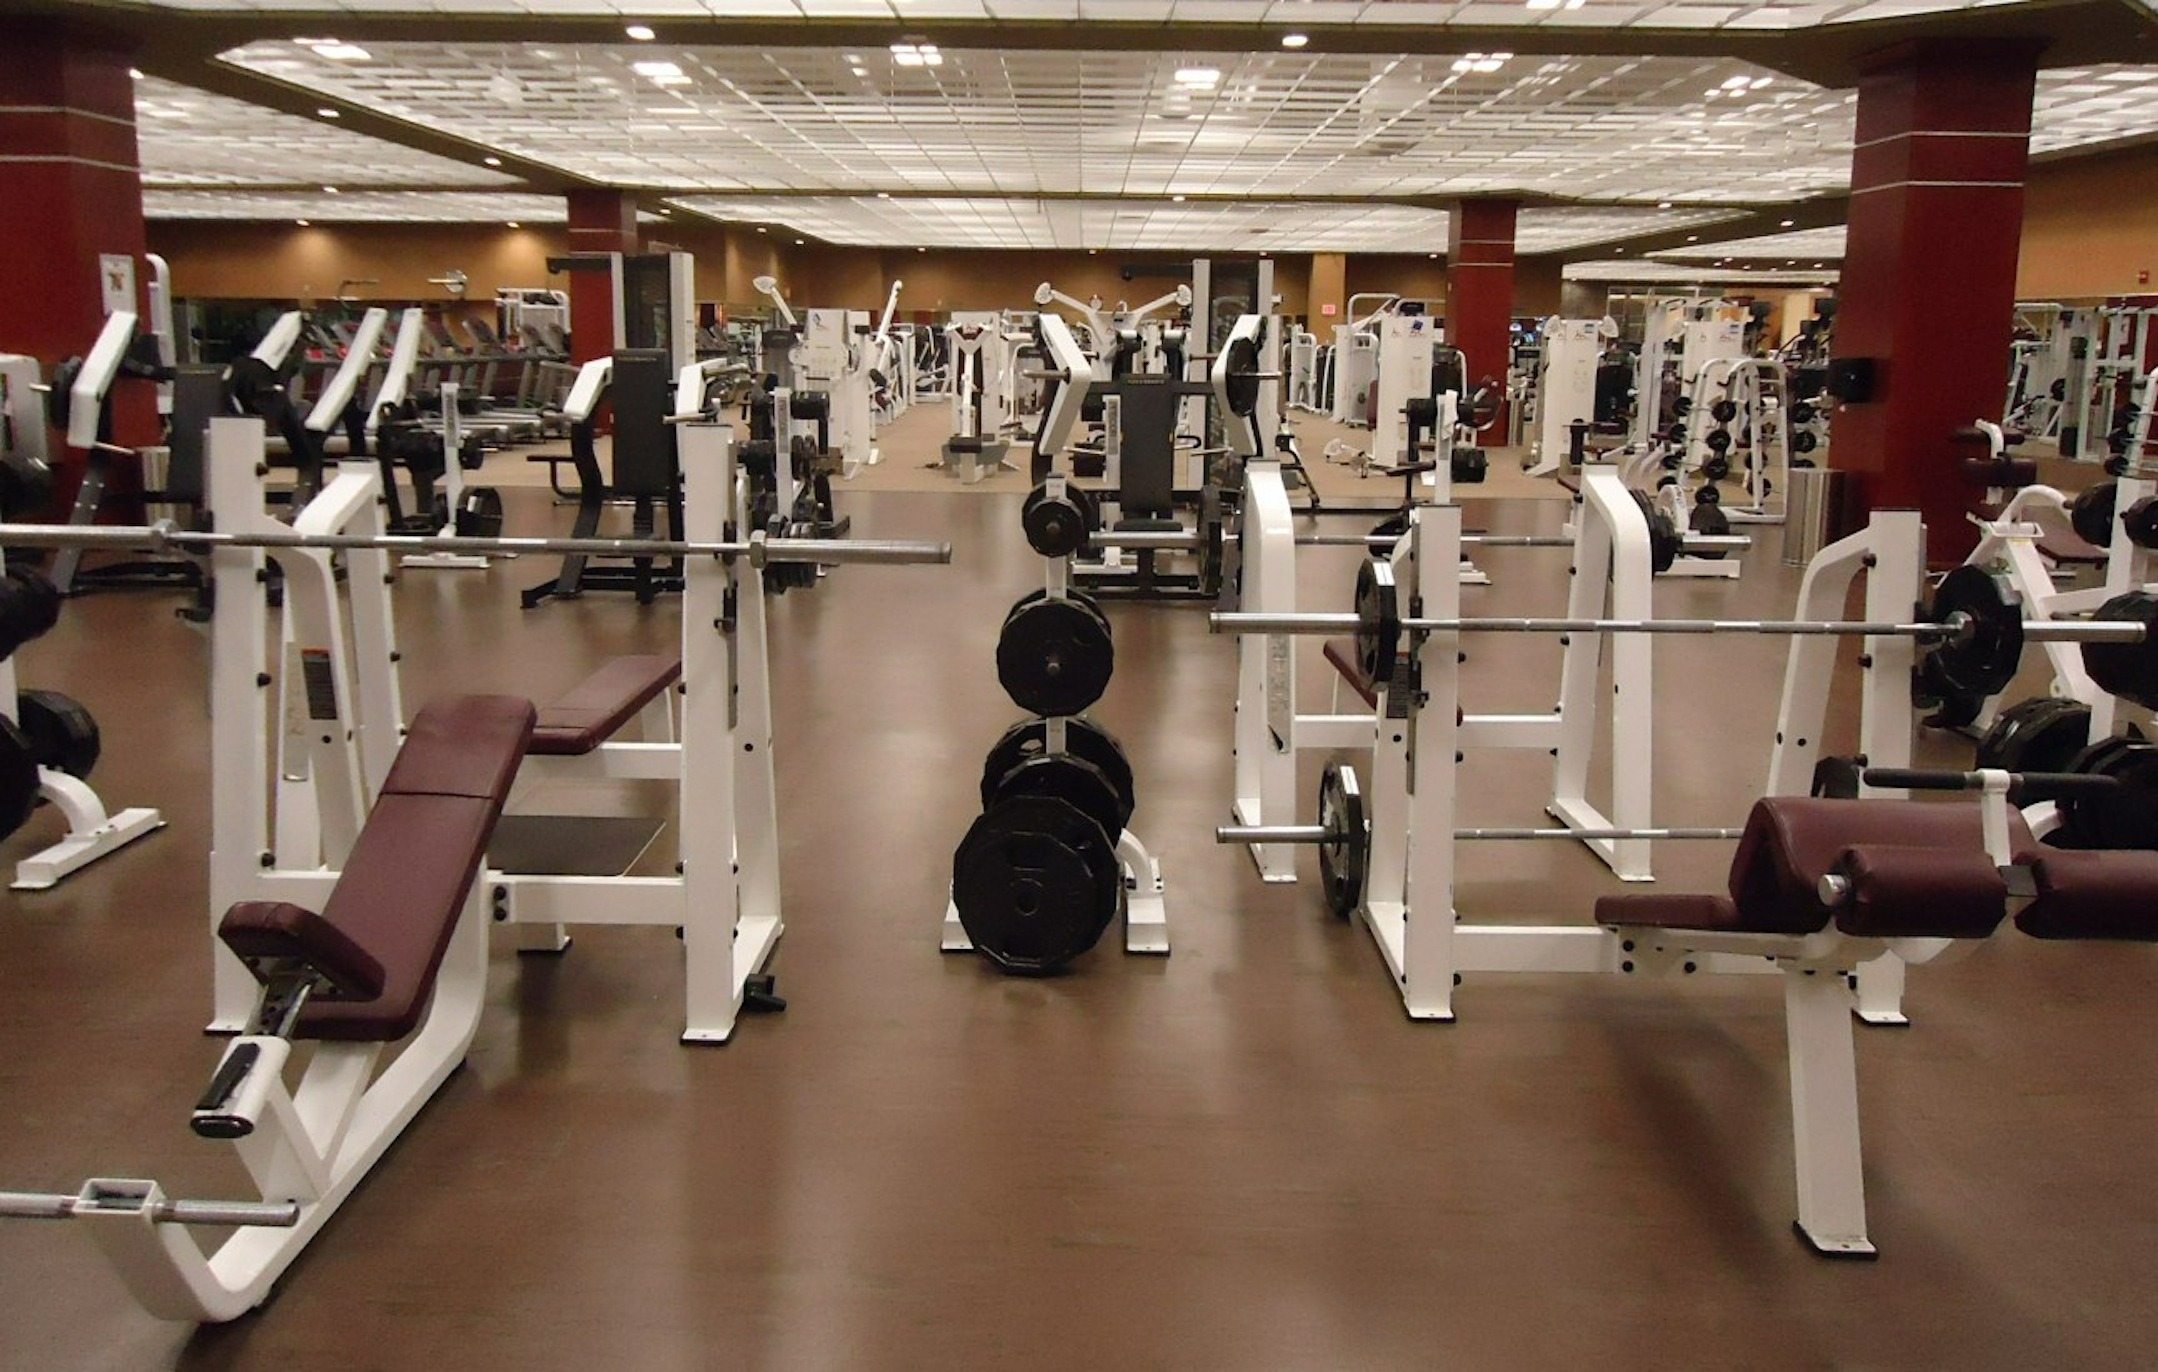 Know Top Gym Equipment Names - Click for More!